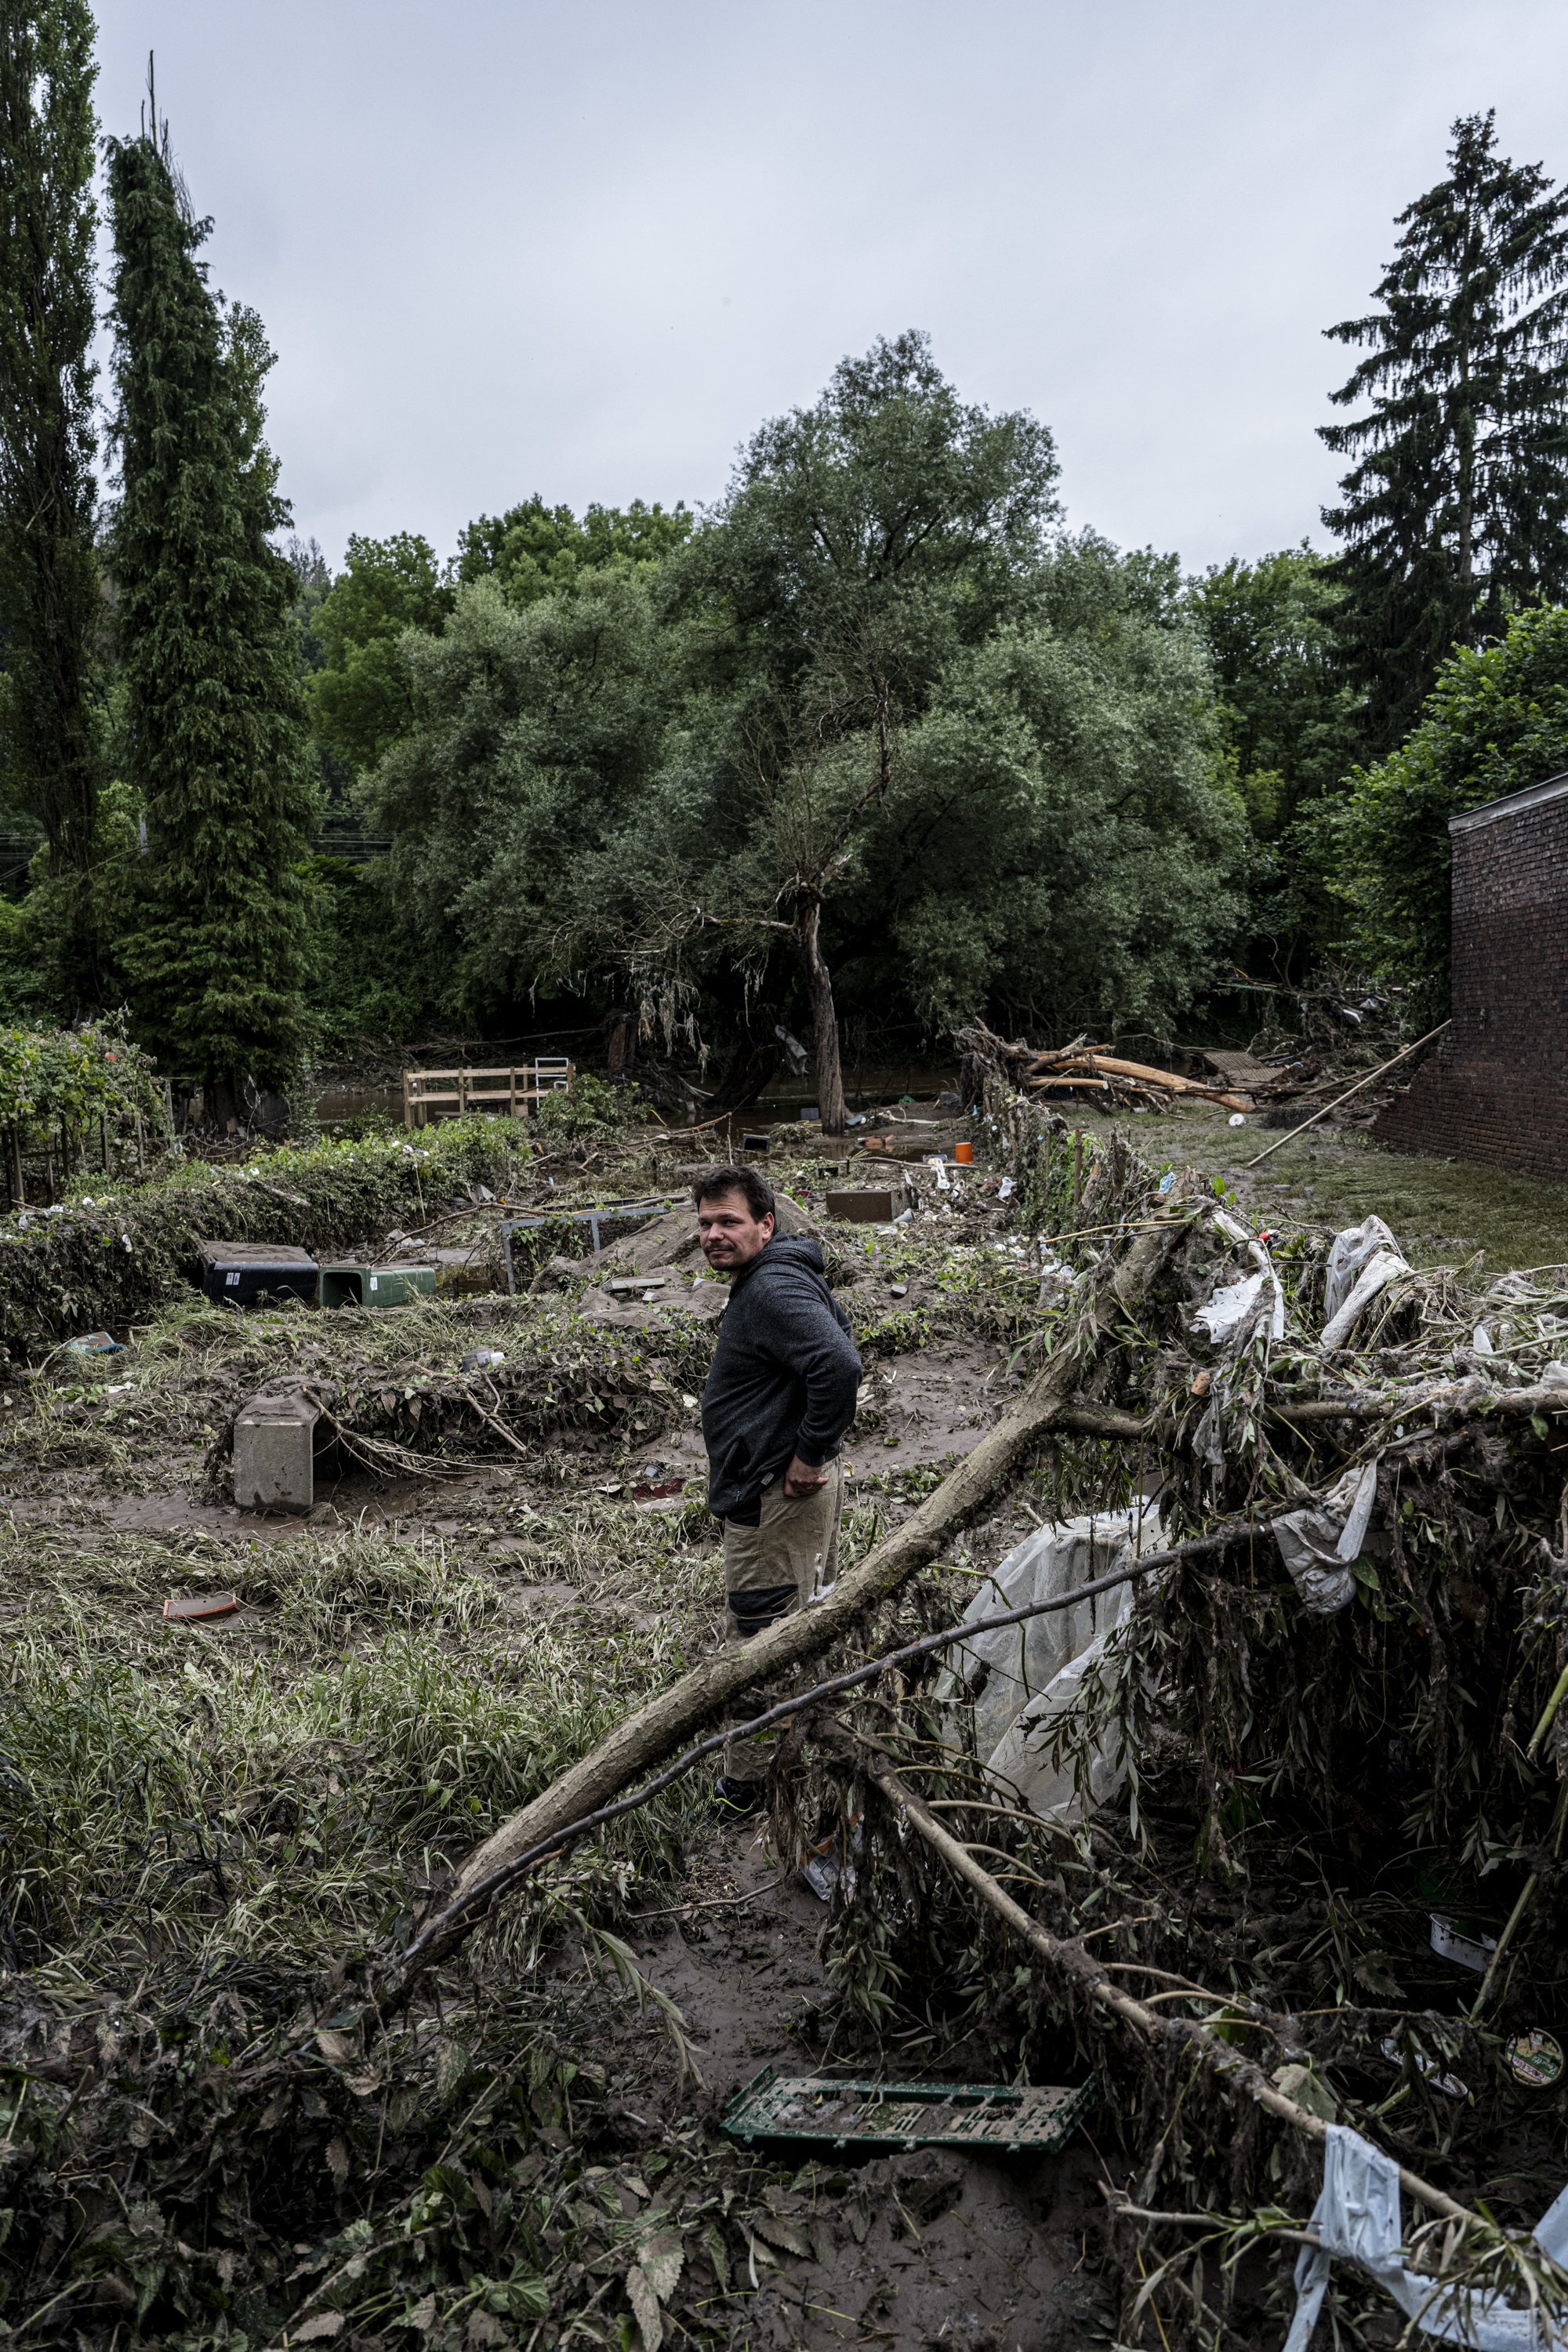  Flooding in Verviers and Pepinster in Belgium on 16 July 2021. Photo by Sébastien Van Malleghem. A citizen shows me what is left of the garden.   